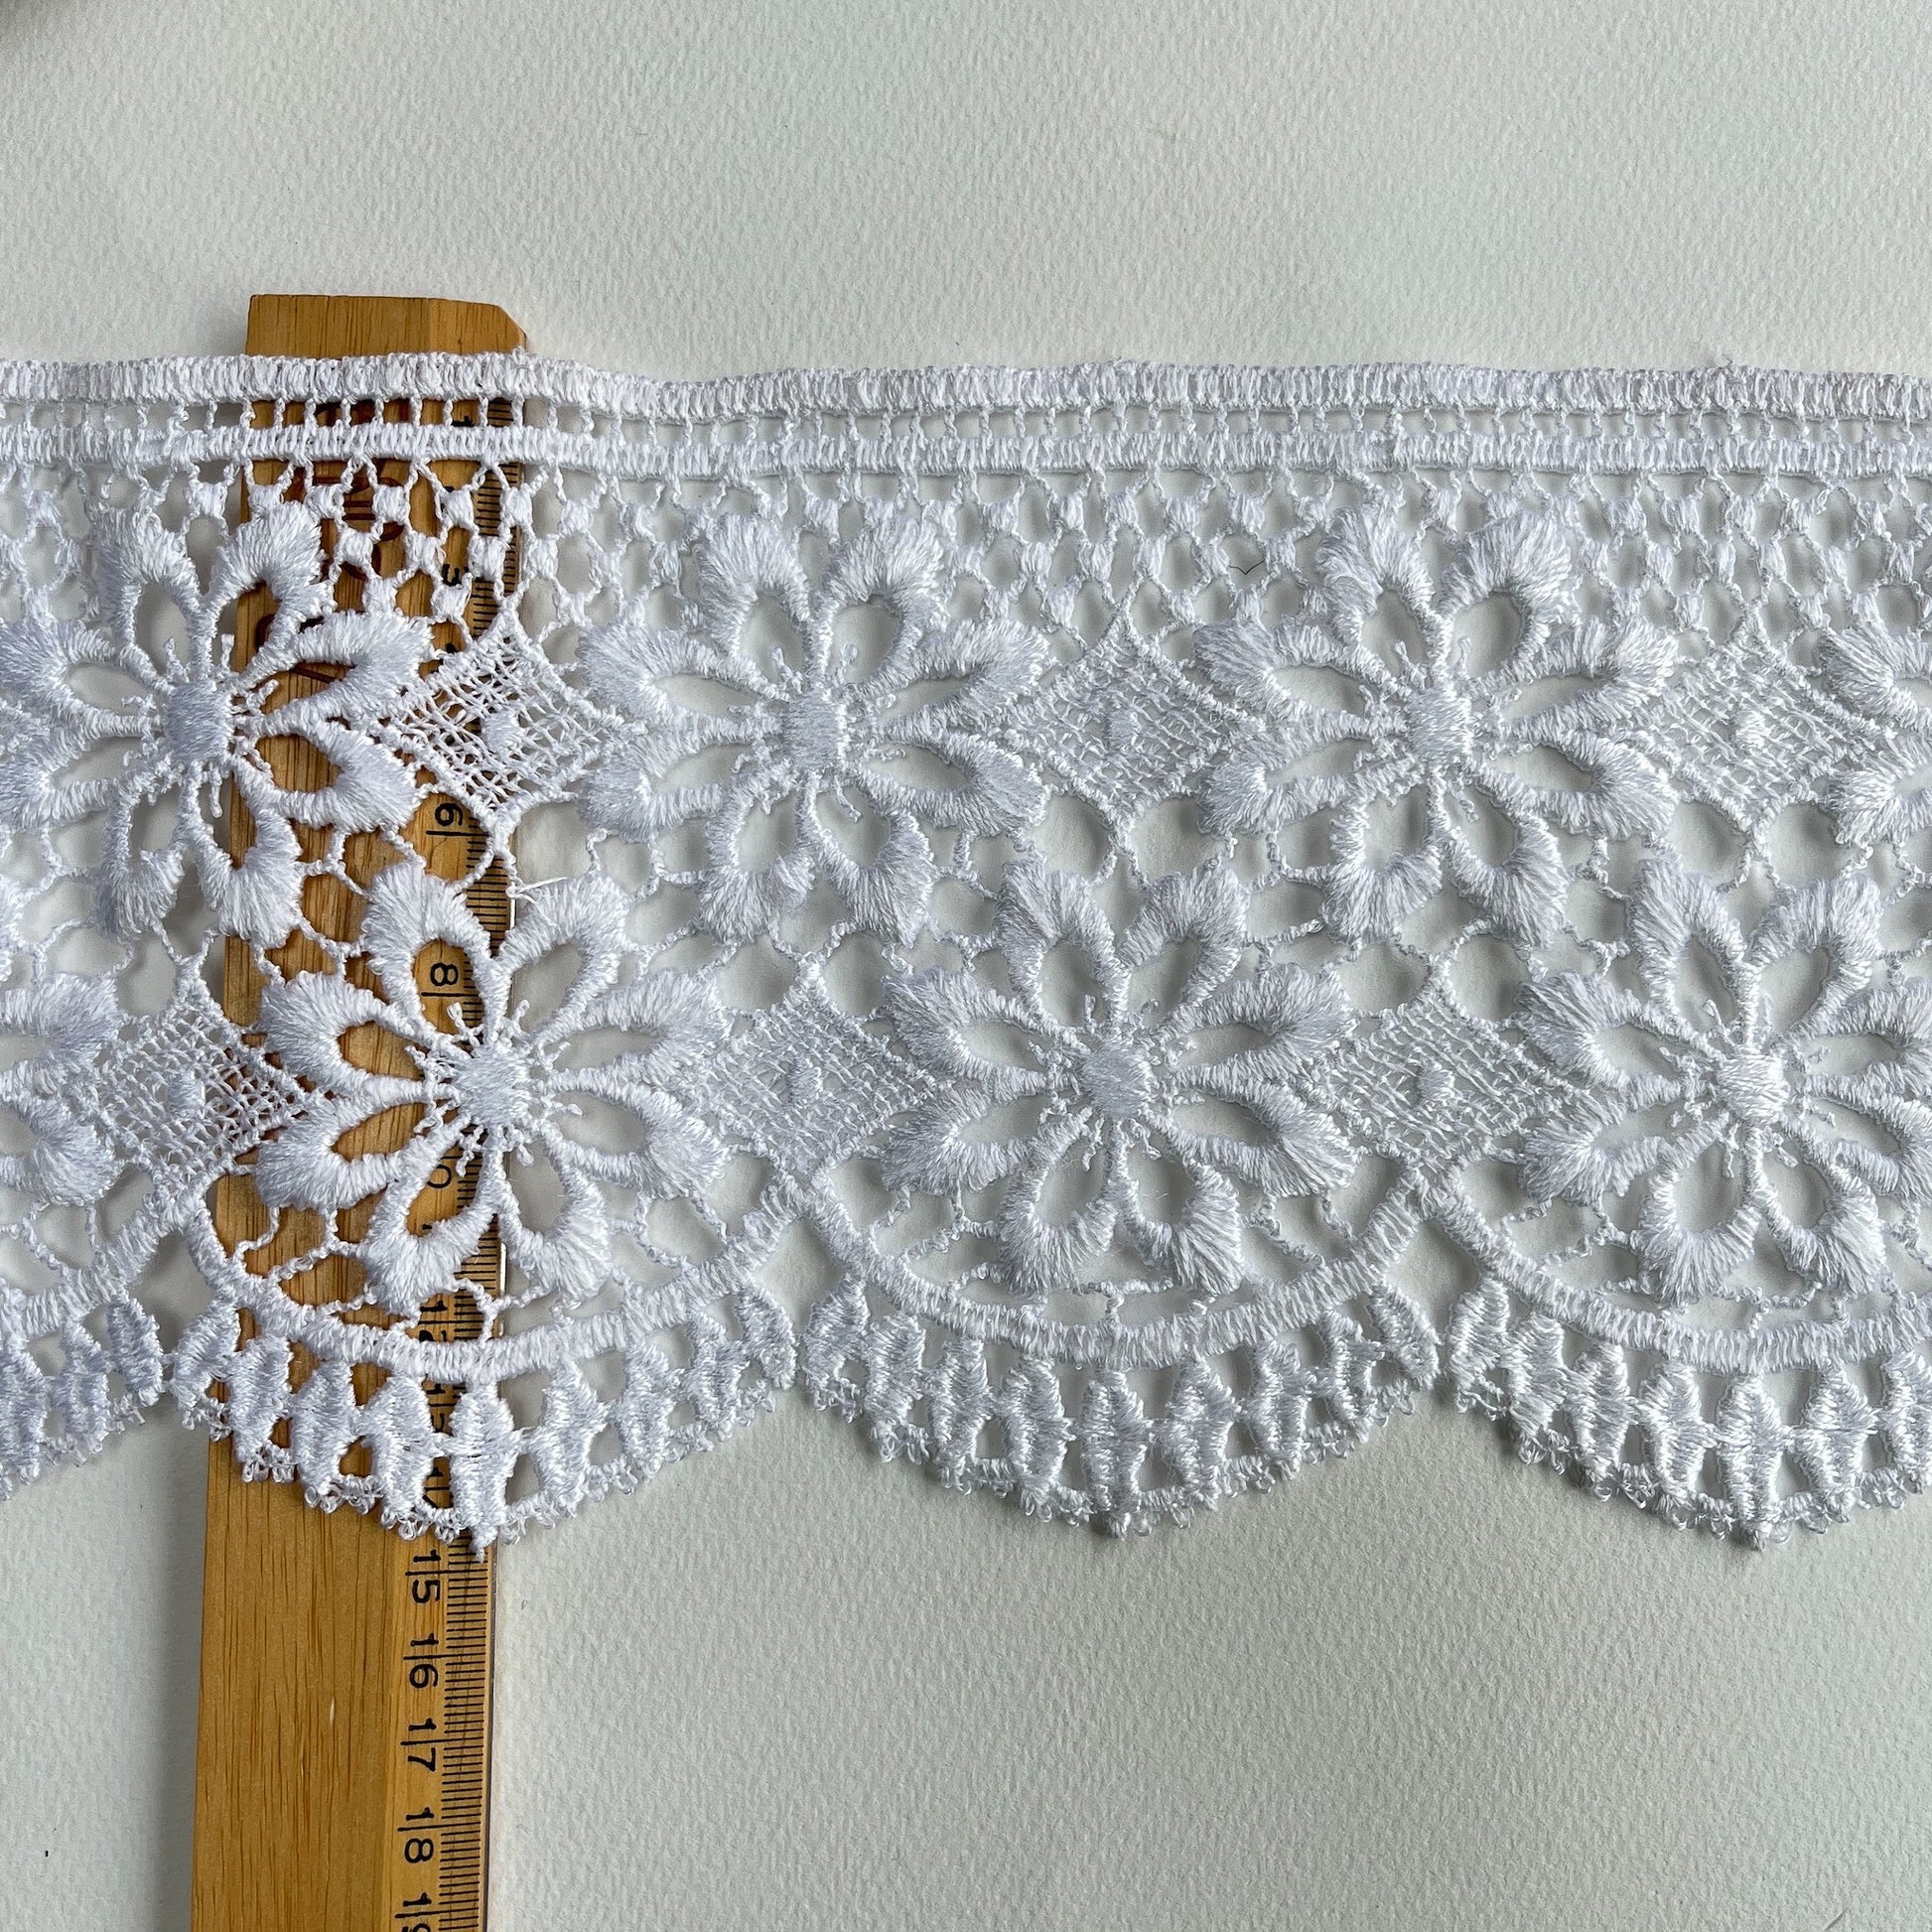 15cm deep guipure bridal lace trim with delicate scroll design and scalloped edge.